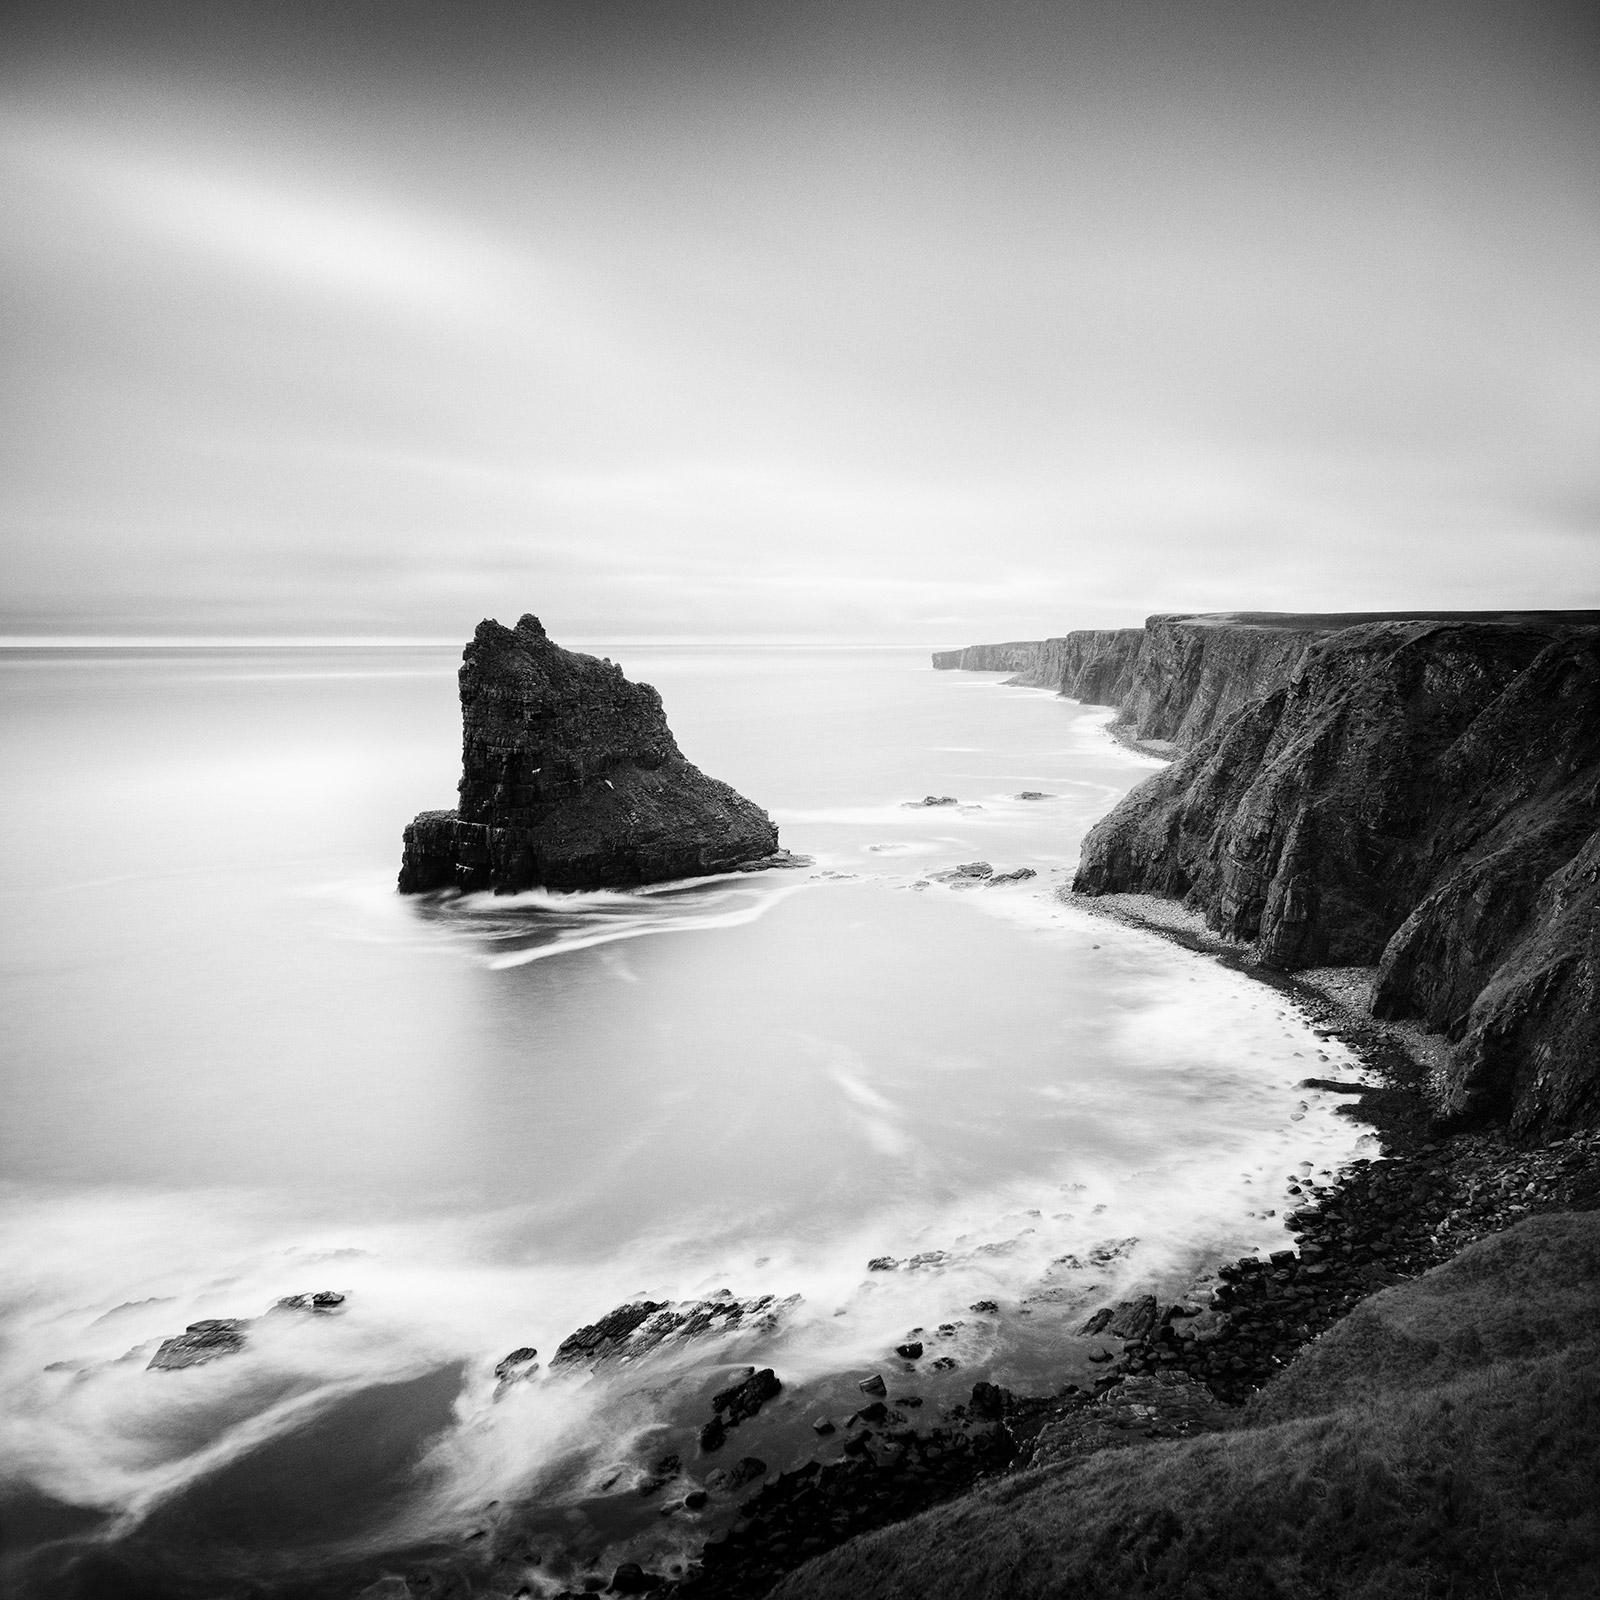 Gerald Berghammer Black and White Photograph - Surreal Moment, scottish coastline cliff, black and white photography, landscape